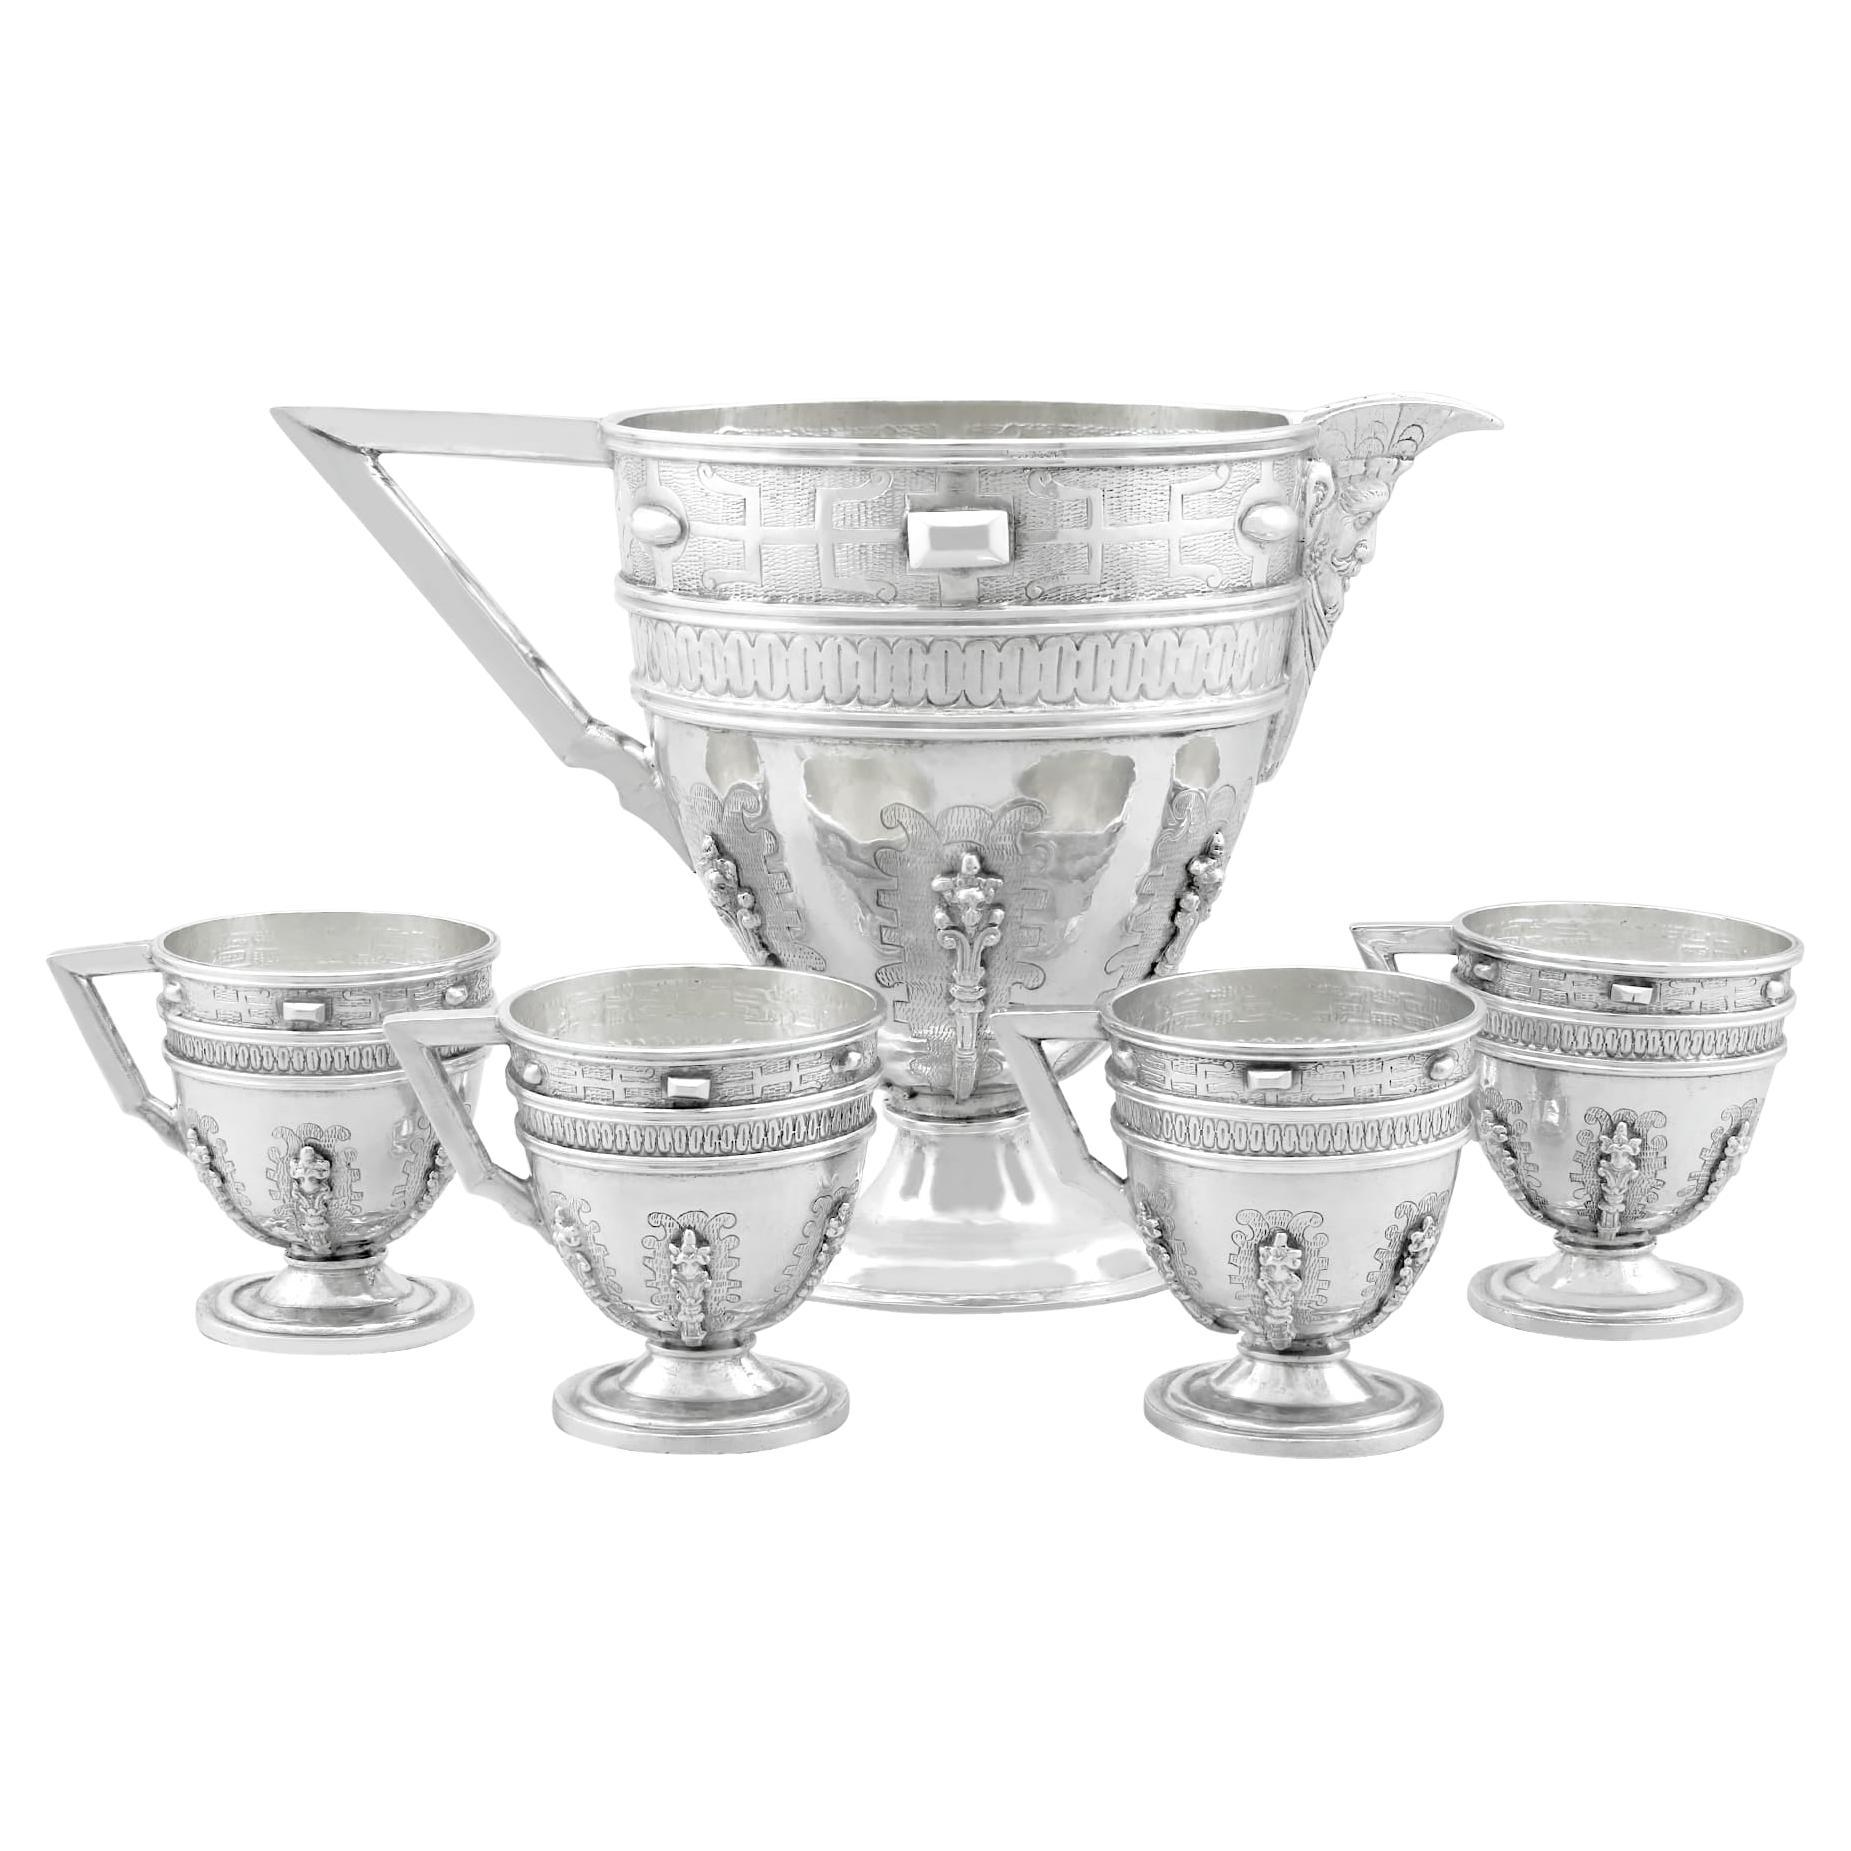 Antique Spanish Silver Jug and Matching Cups